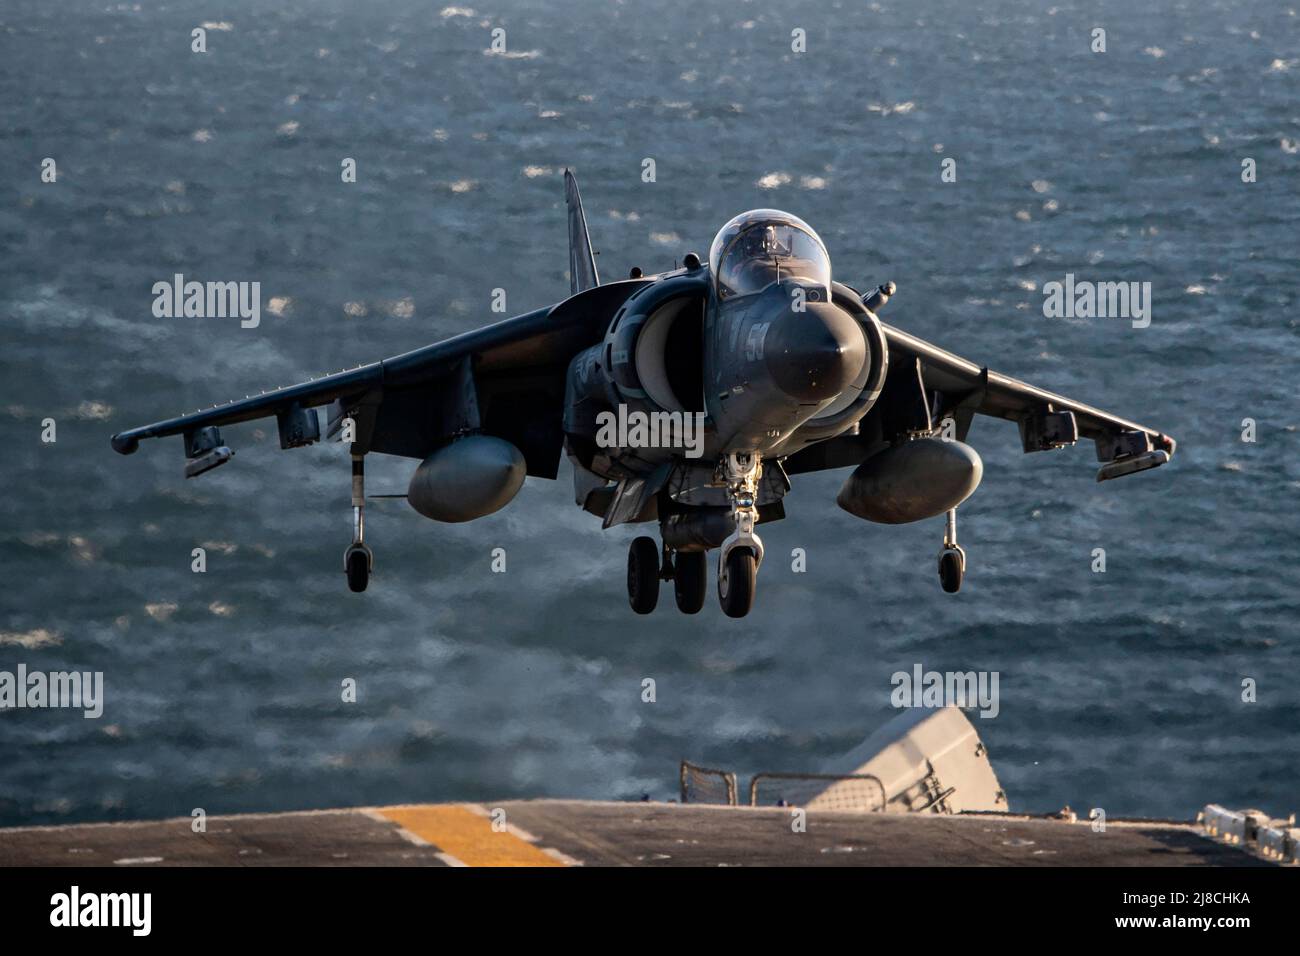 A U.S. Marine Corps AV-8B Harrier attached to the Black Sheep of Marine Attack Squadron 214, performs a vertical landing on the flight deck of the Wasp-class amphibious assault ship USS Essex, December 4, 2021 operating on the Arabian Gulf. Stock Photo